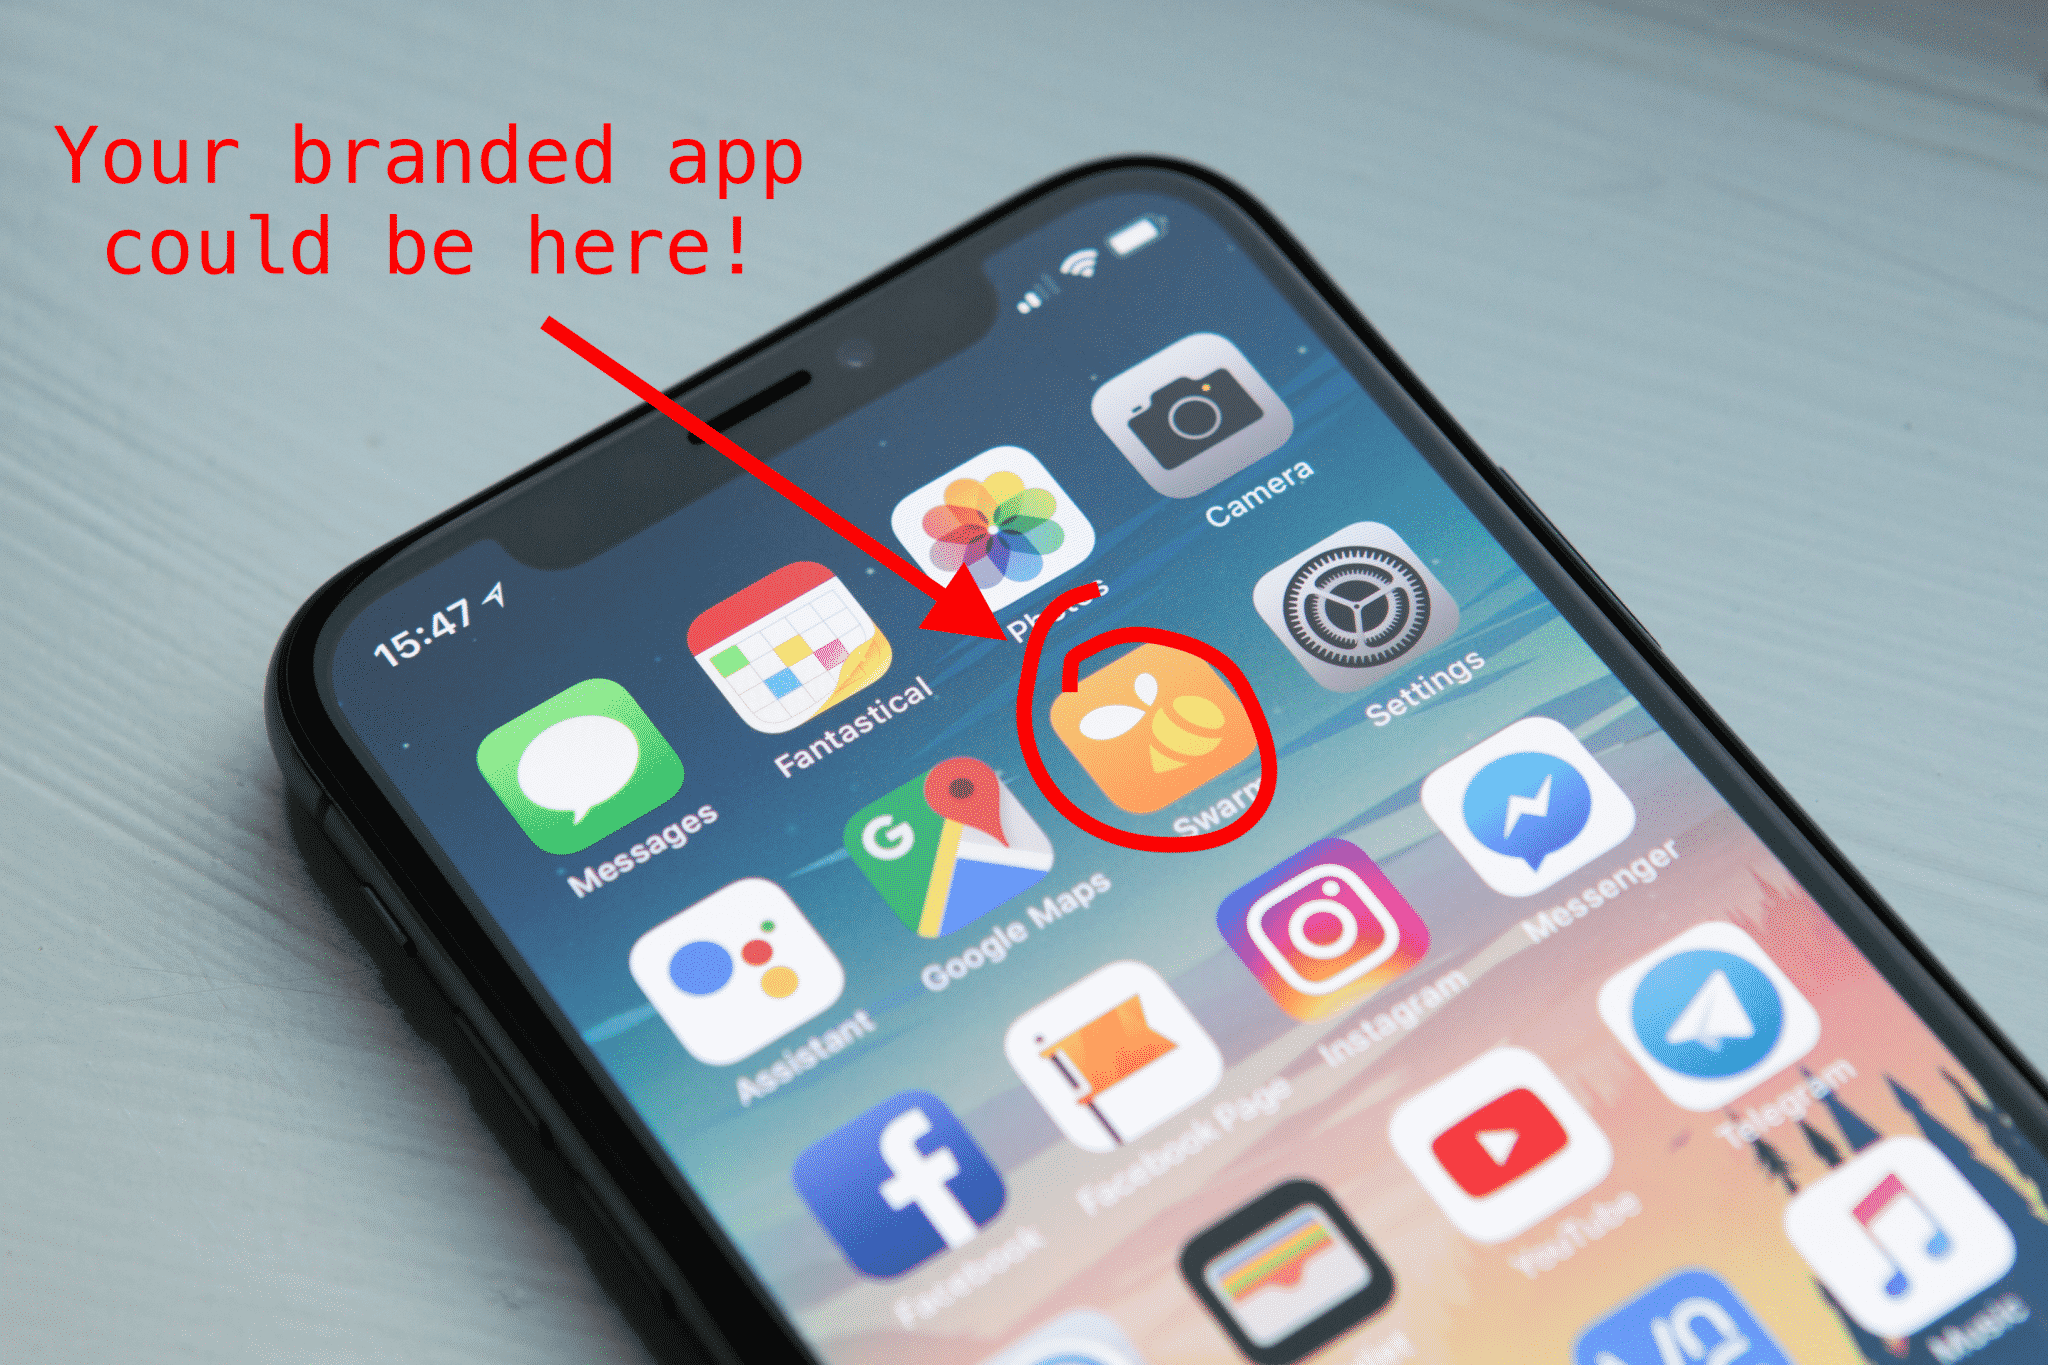 Don't miss out on a branding opportunity - get a native app today!